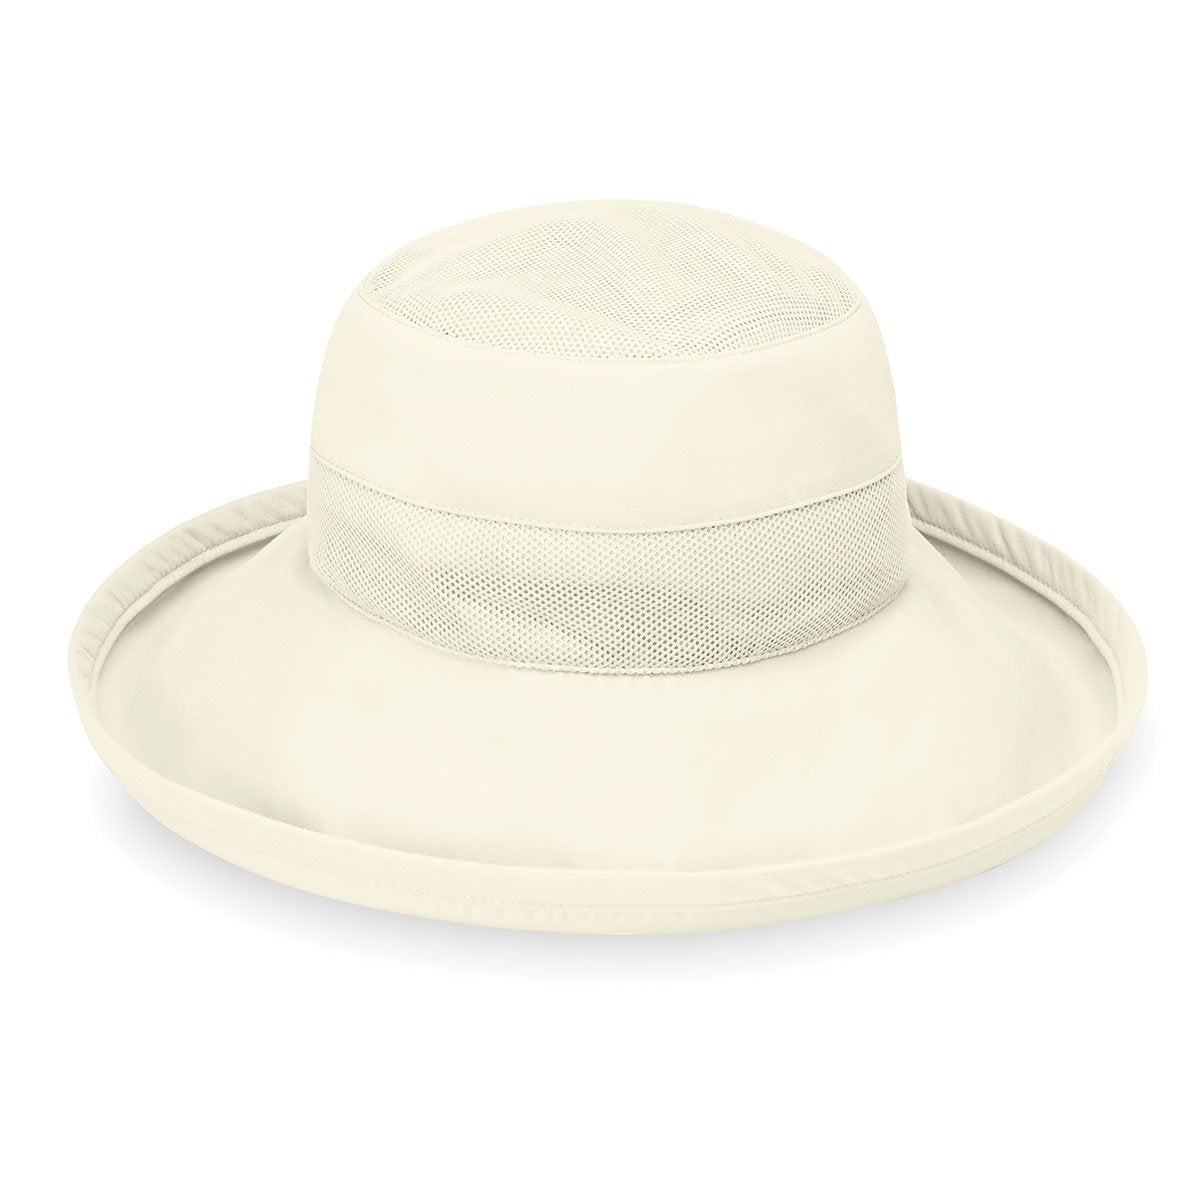 Featuring Women's Packable and Adjustable Seaside UPF Sun Hat with Chinstrap in Natural from Wallaroo